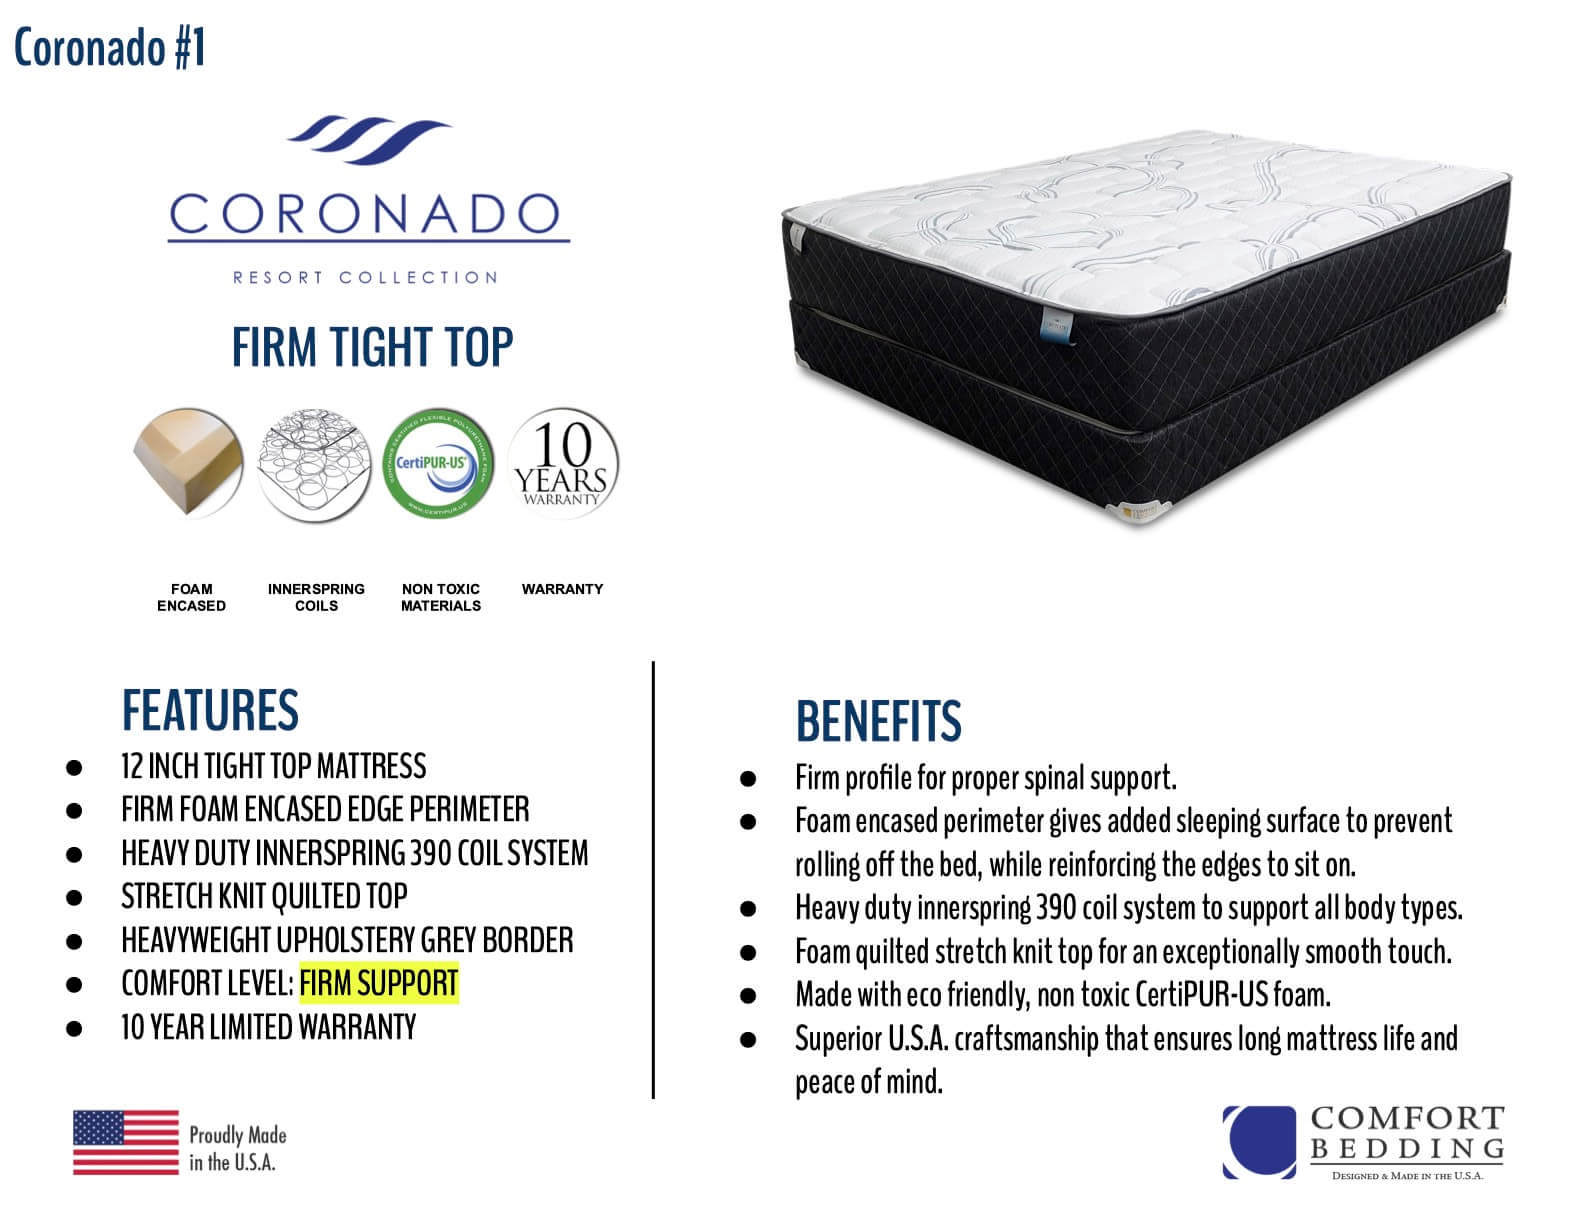 Coronado Firm Tight Top by Comfort Bedding product image